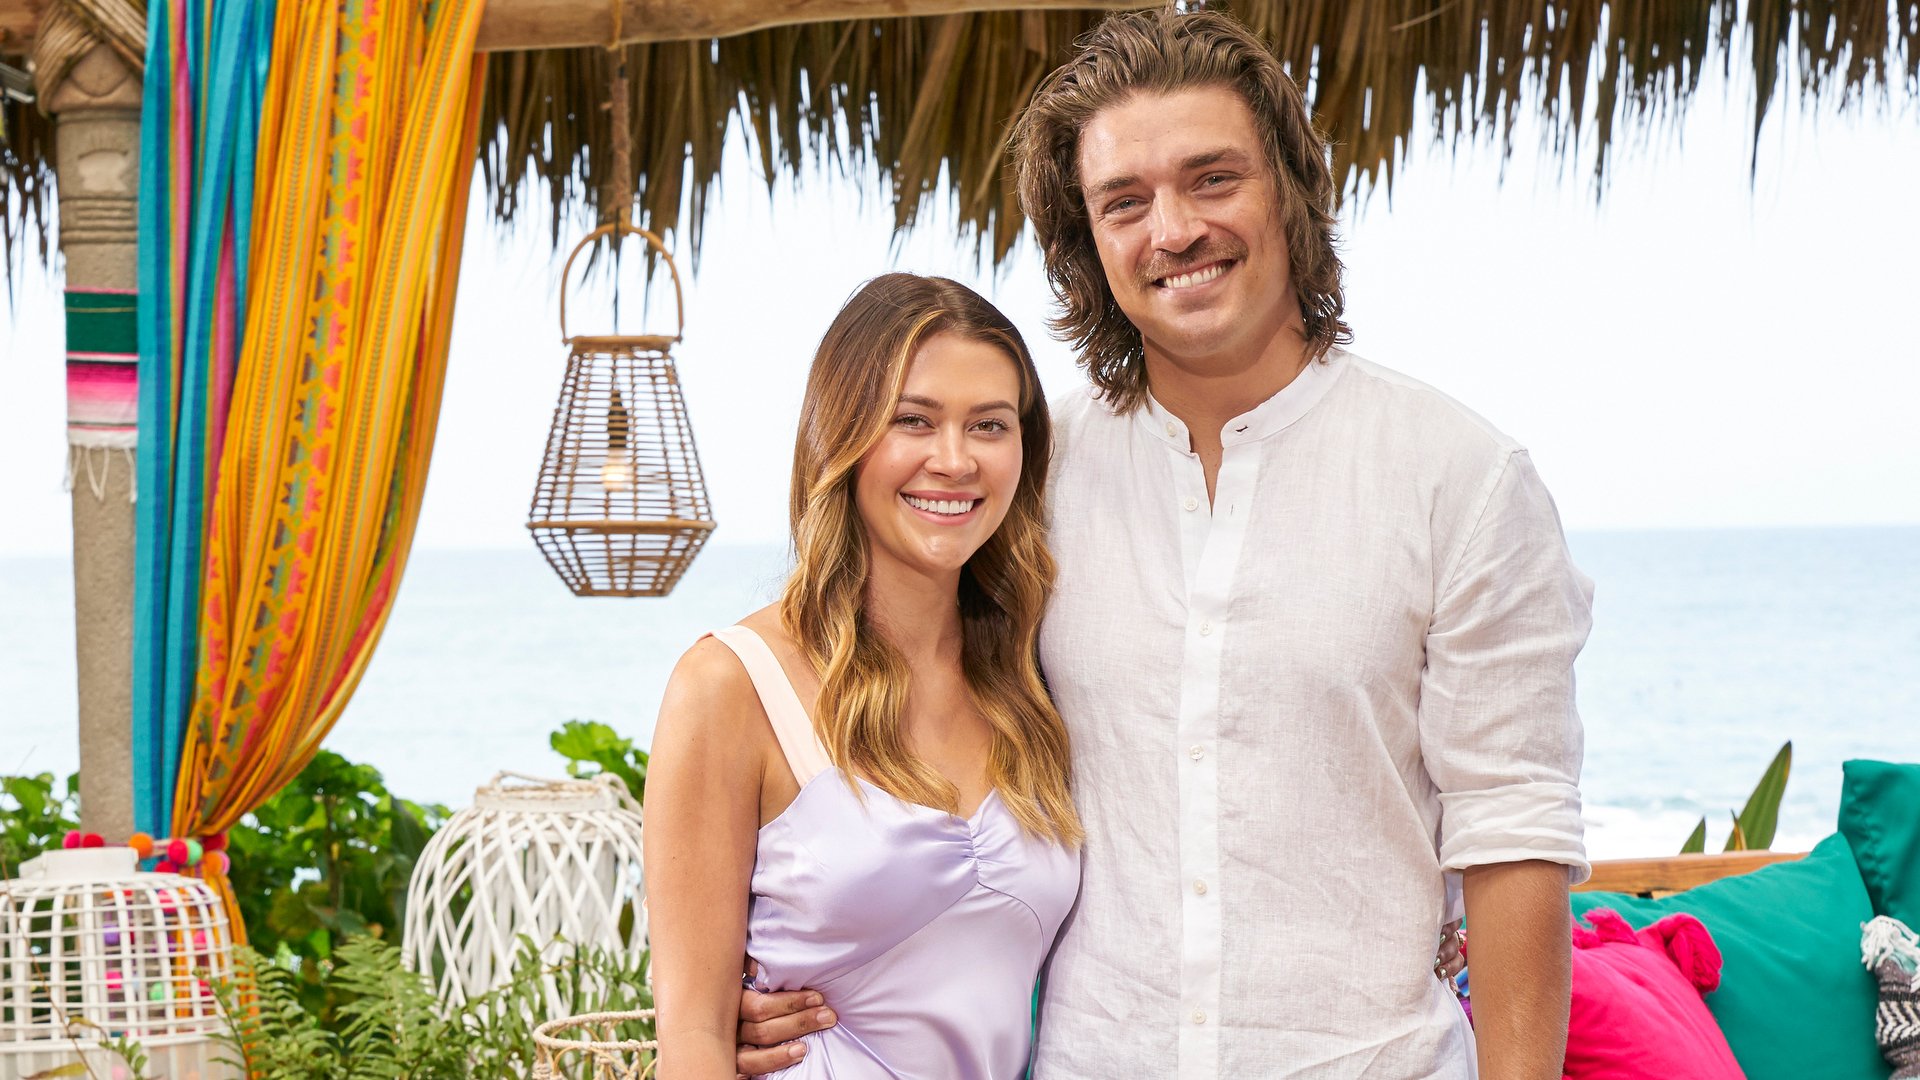 Caelynn Miller-Keyes and Dean Unglert pose together in ‘Bachelor in Paradise’ Season 7 in 2021